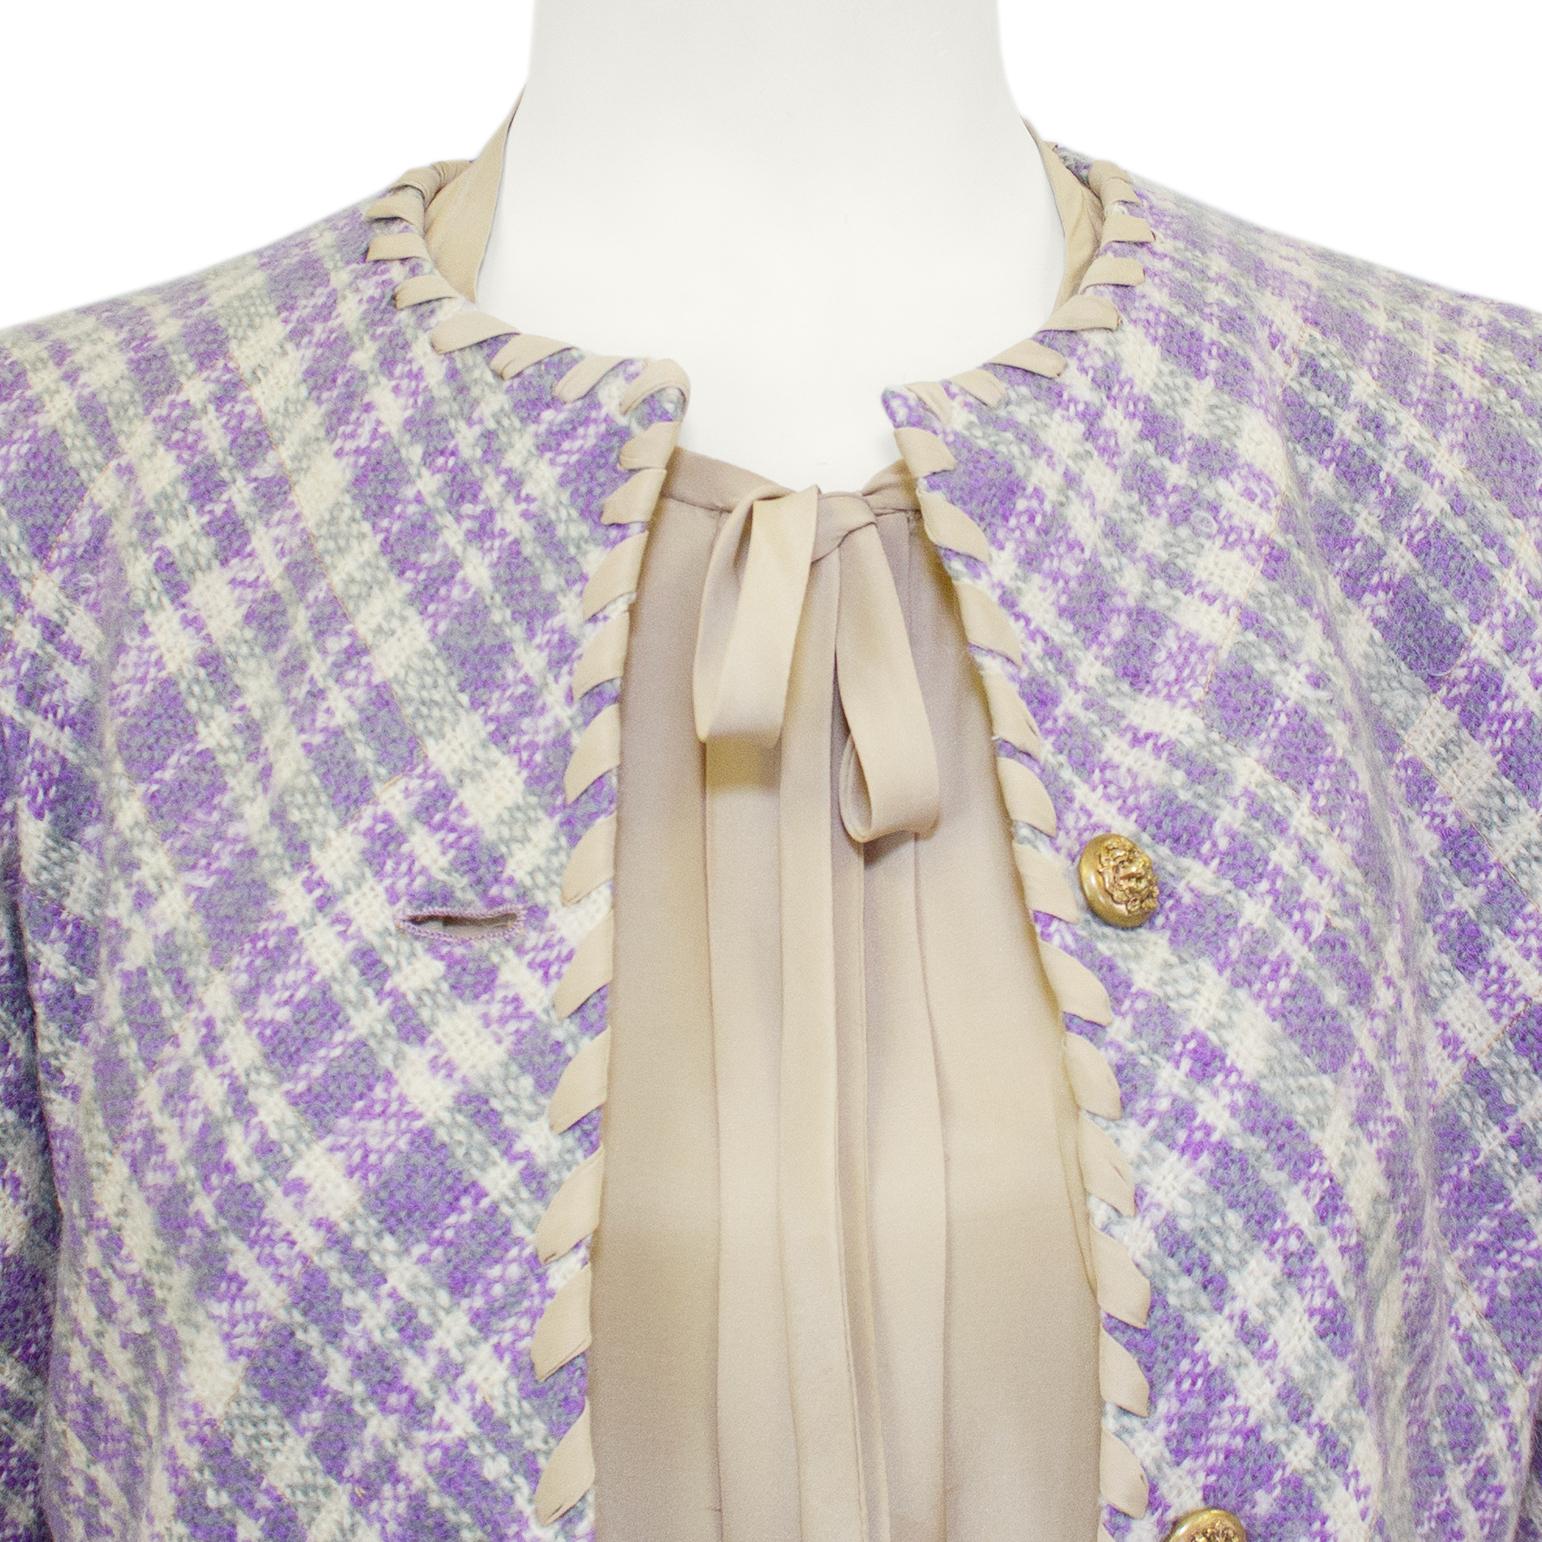 1960s Chanel Haute Couture Purple Tweed Jacket and Dress Ensemble 1